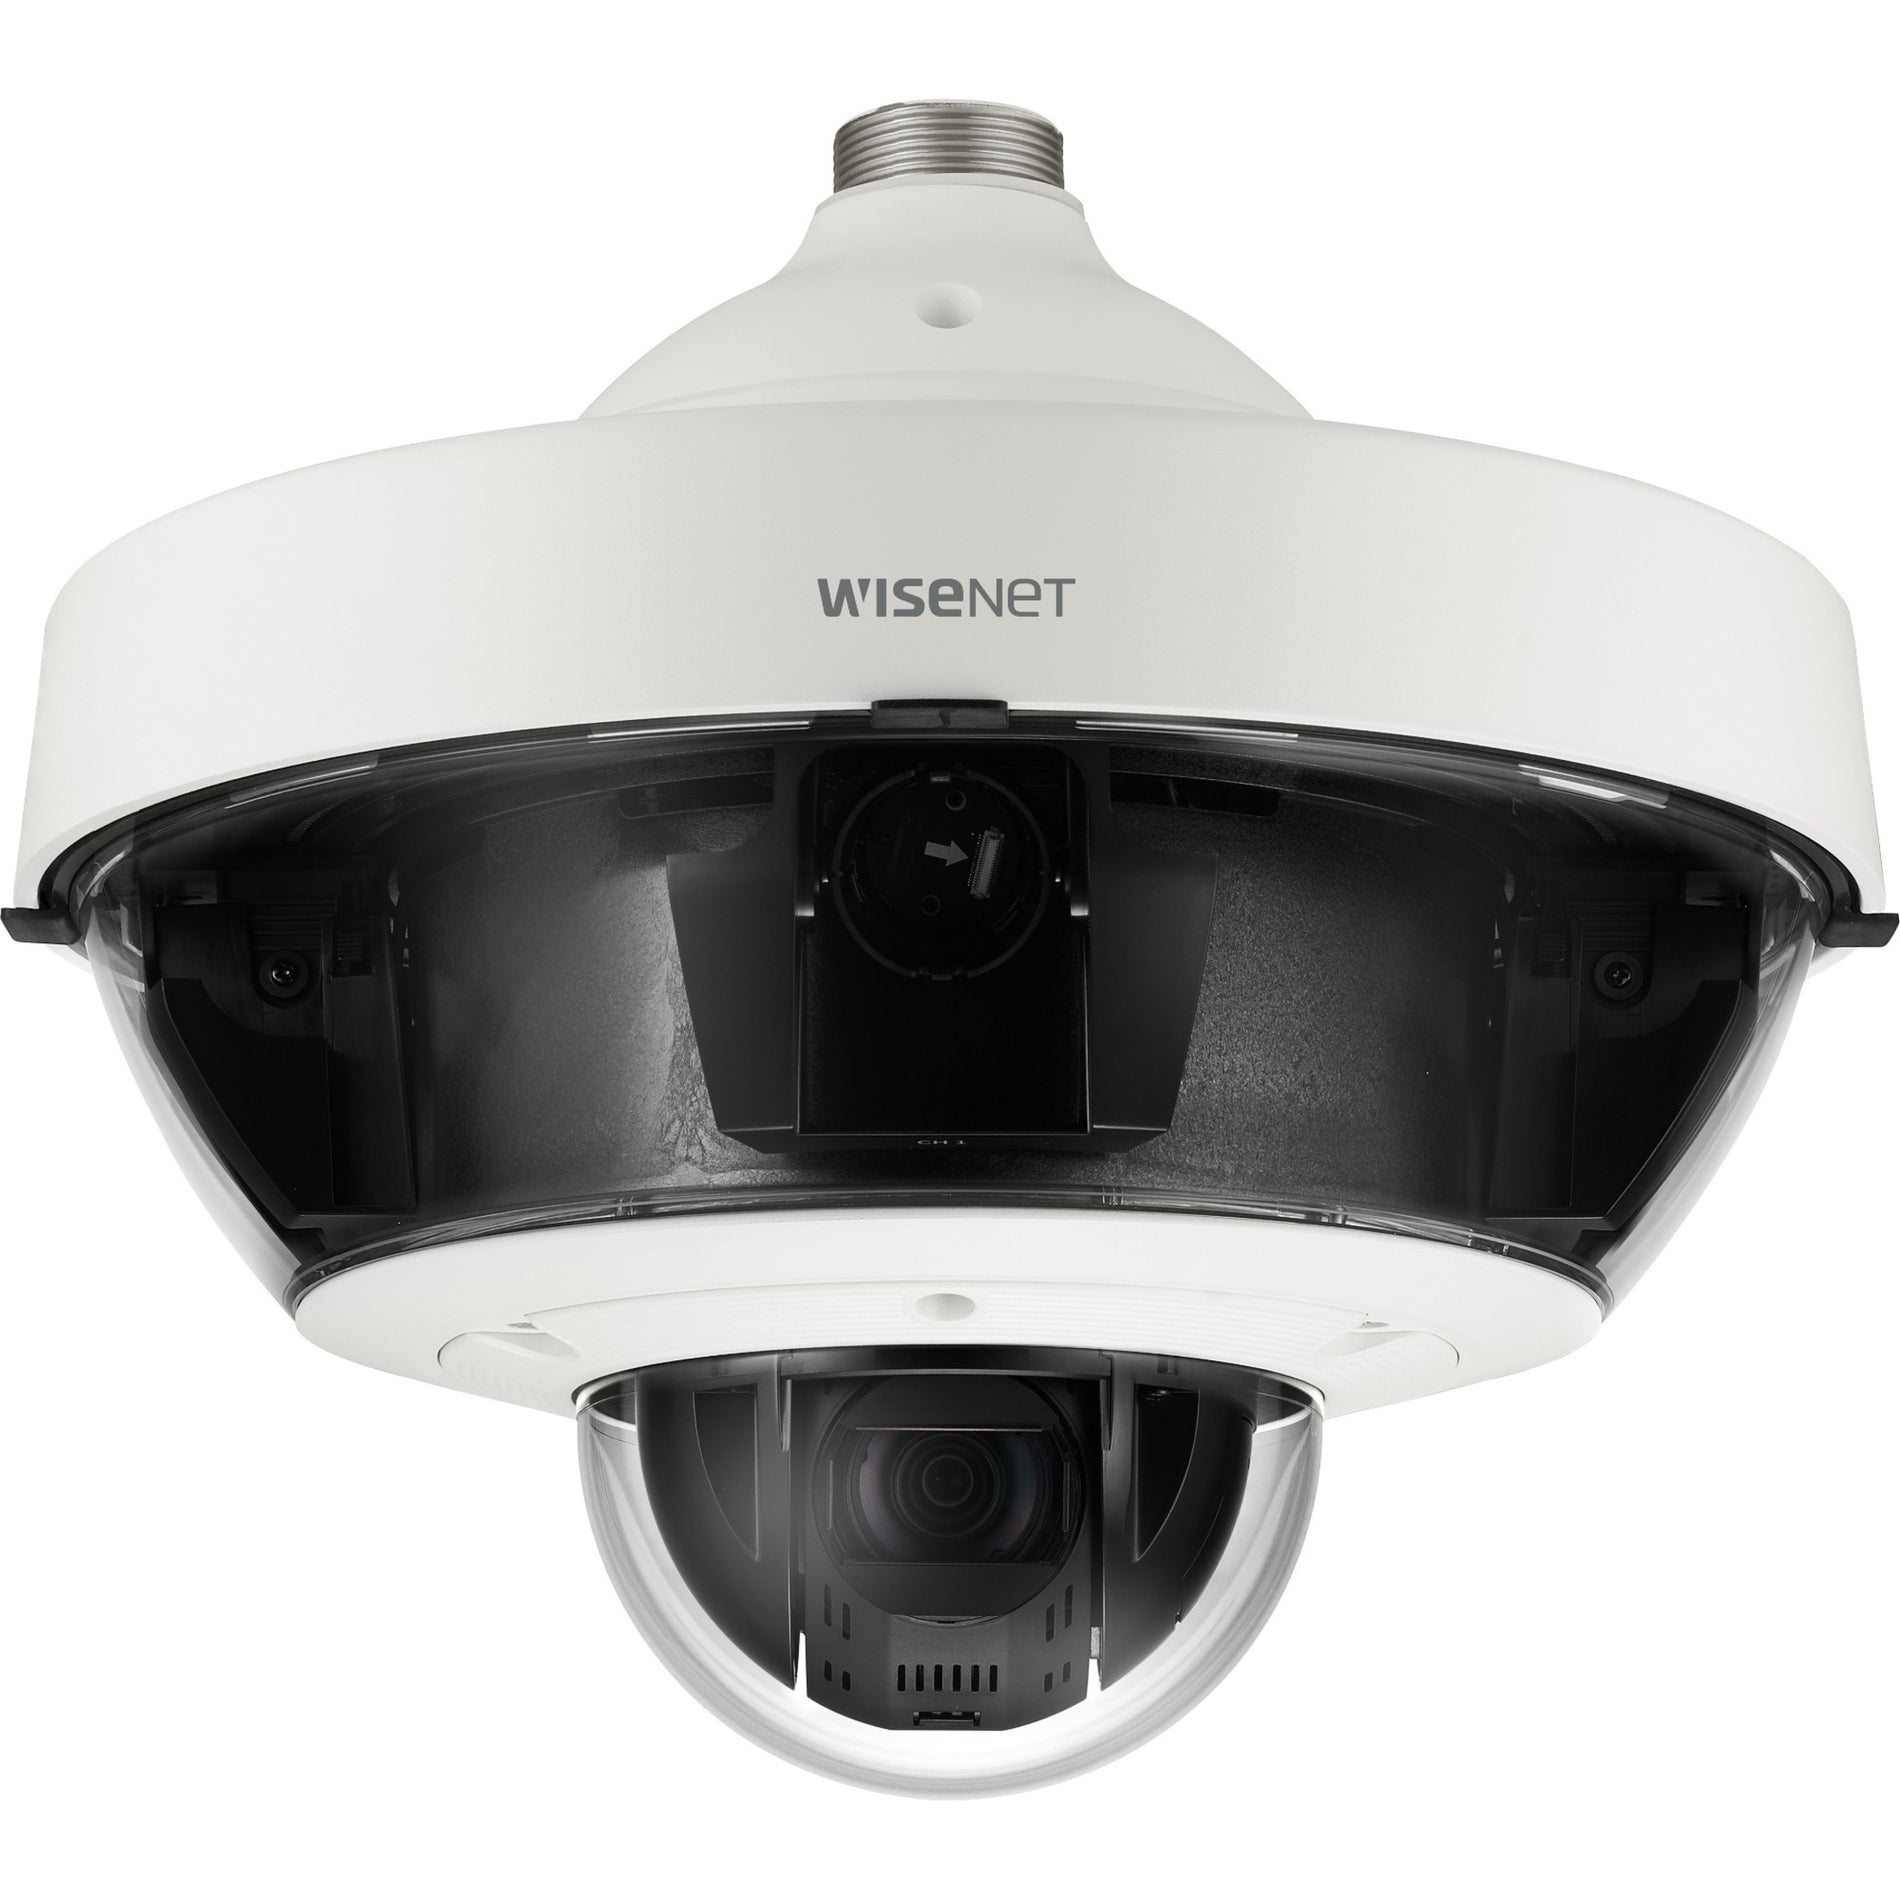 Wisenet PNM-9322VQP 10MP to 22MP Multi-directional + 2MP PTZ Network Camera, Outdoor Vandal Resistant Dome, Full HD Recording